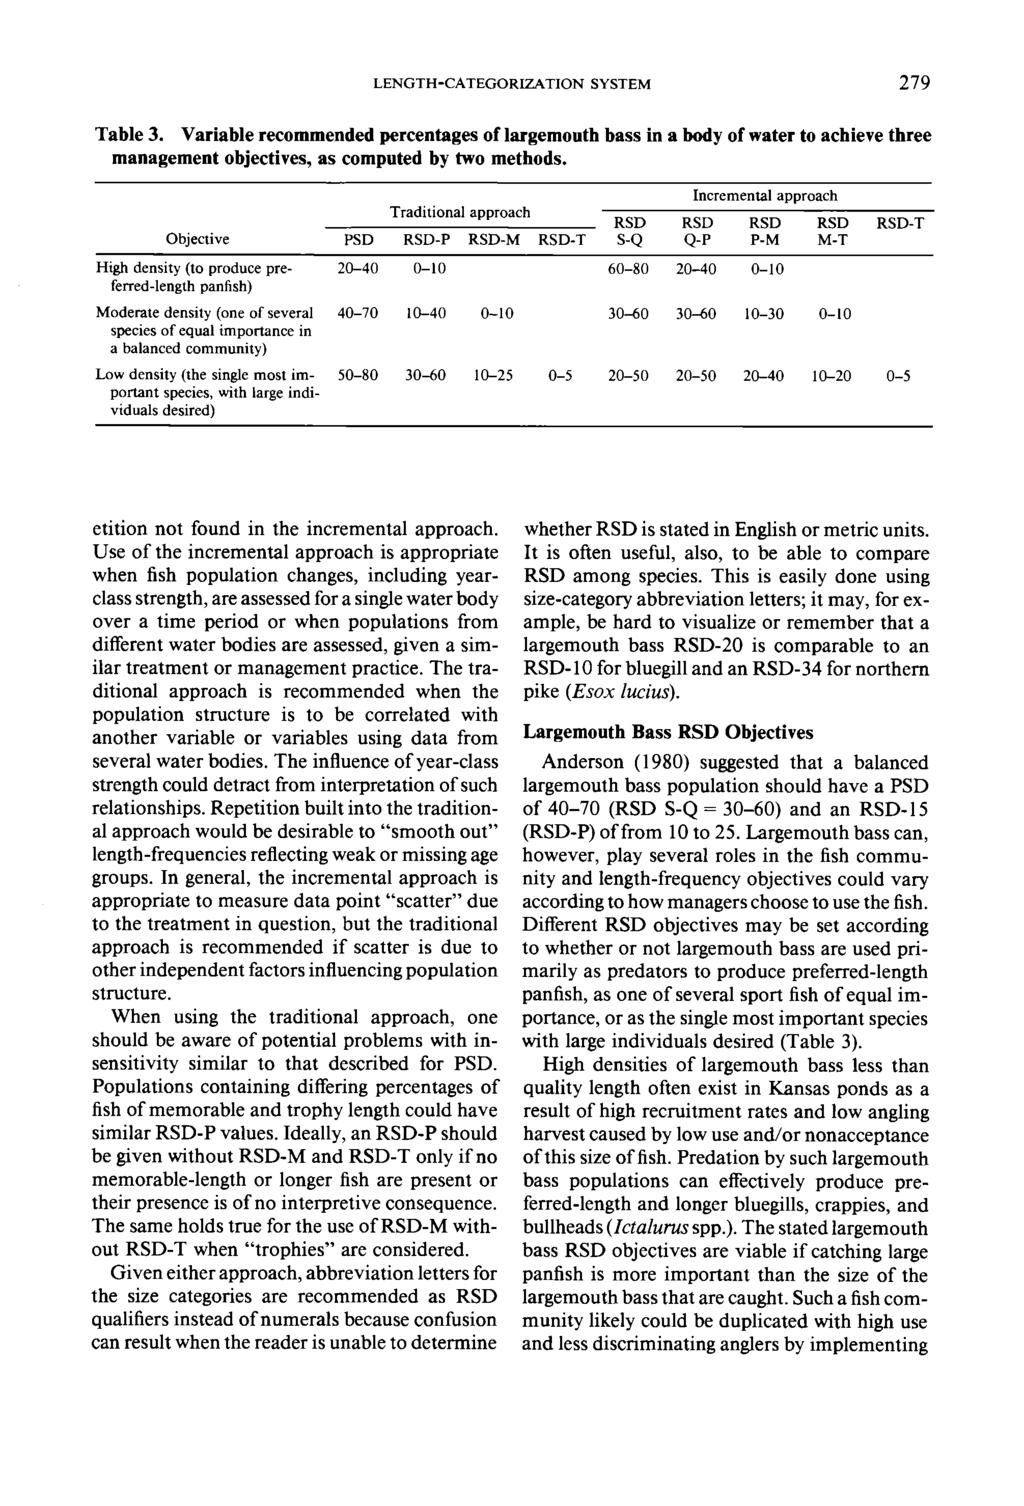 LENGTH-CATEGORIZATION SYSTEM 279 Table 3. Variable recommended percentages of largemouth bass in a body of water to achieve three management objectives, as computed by two methods.